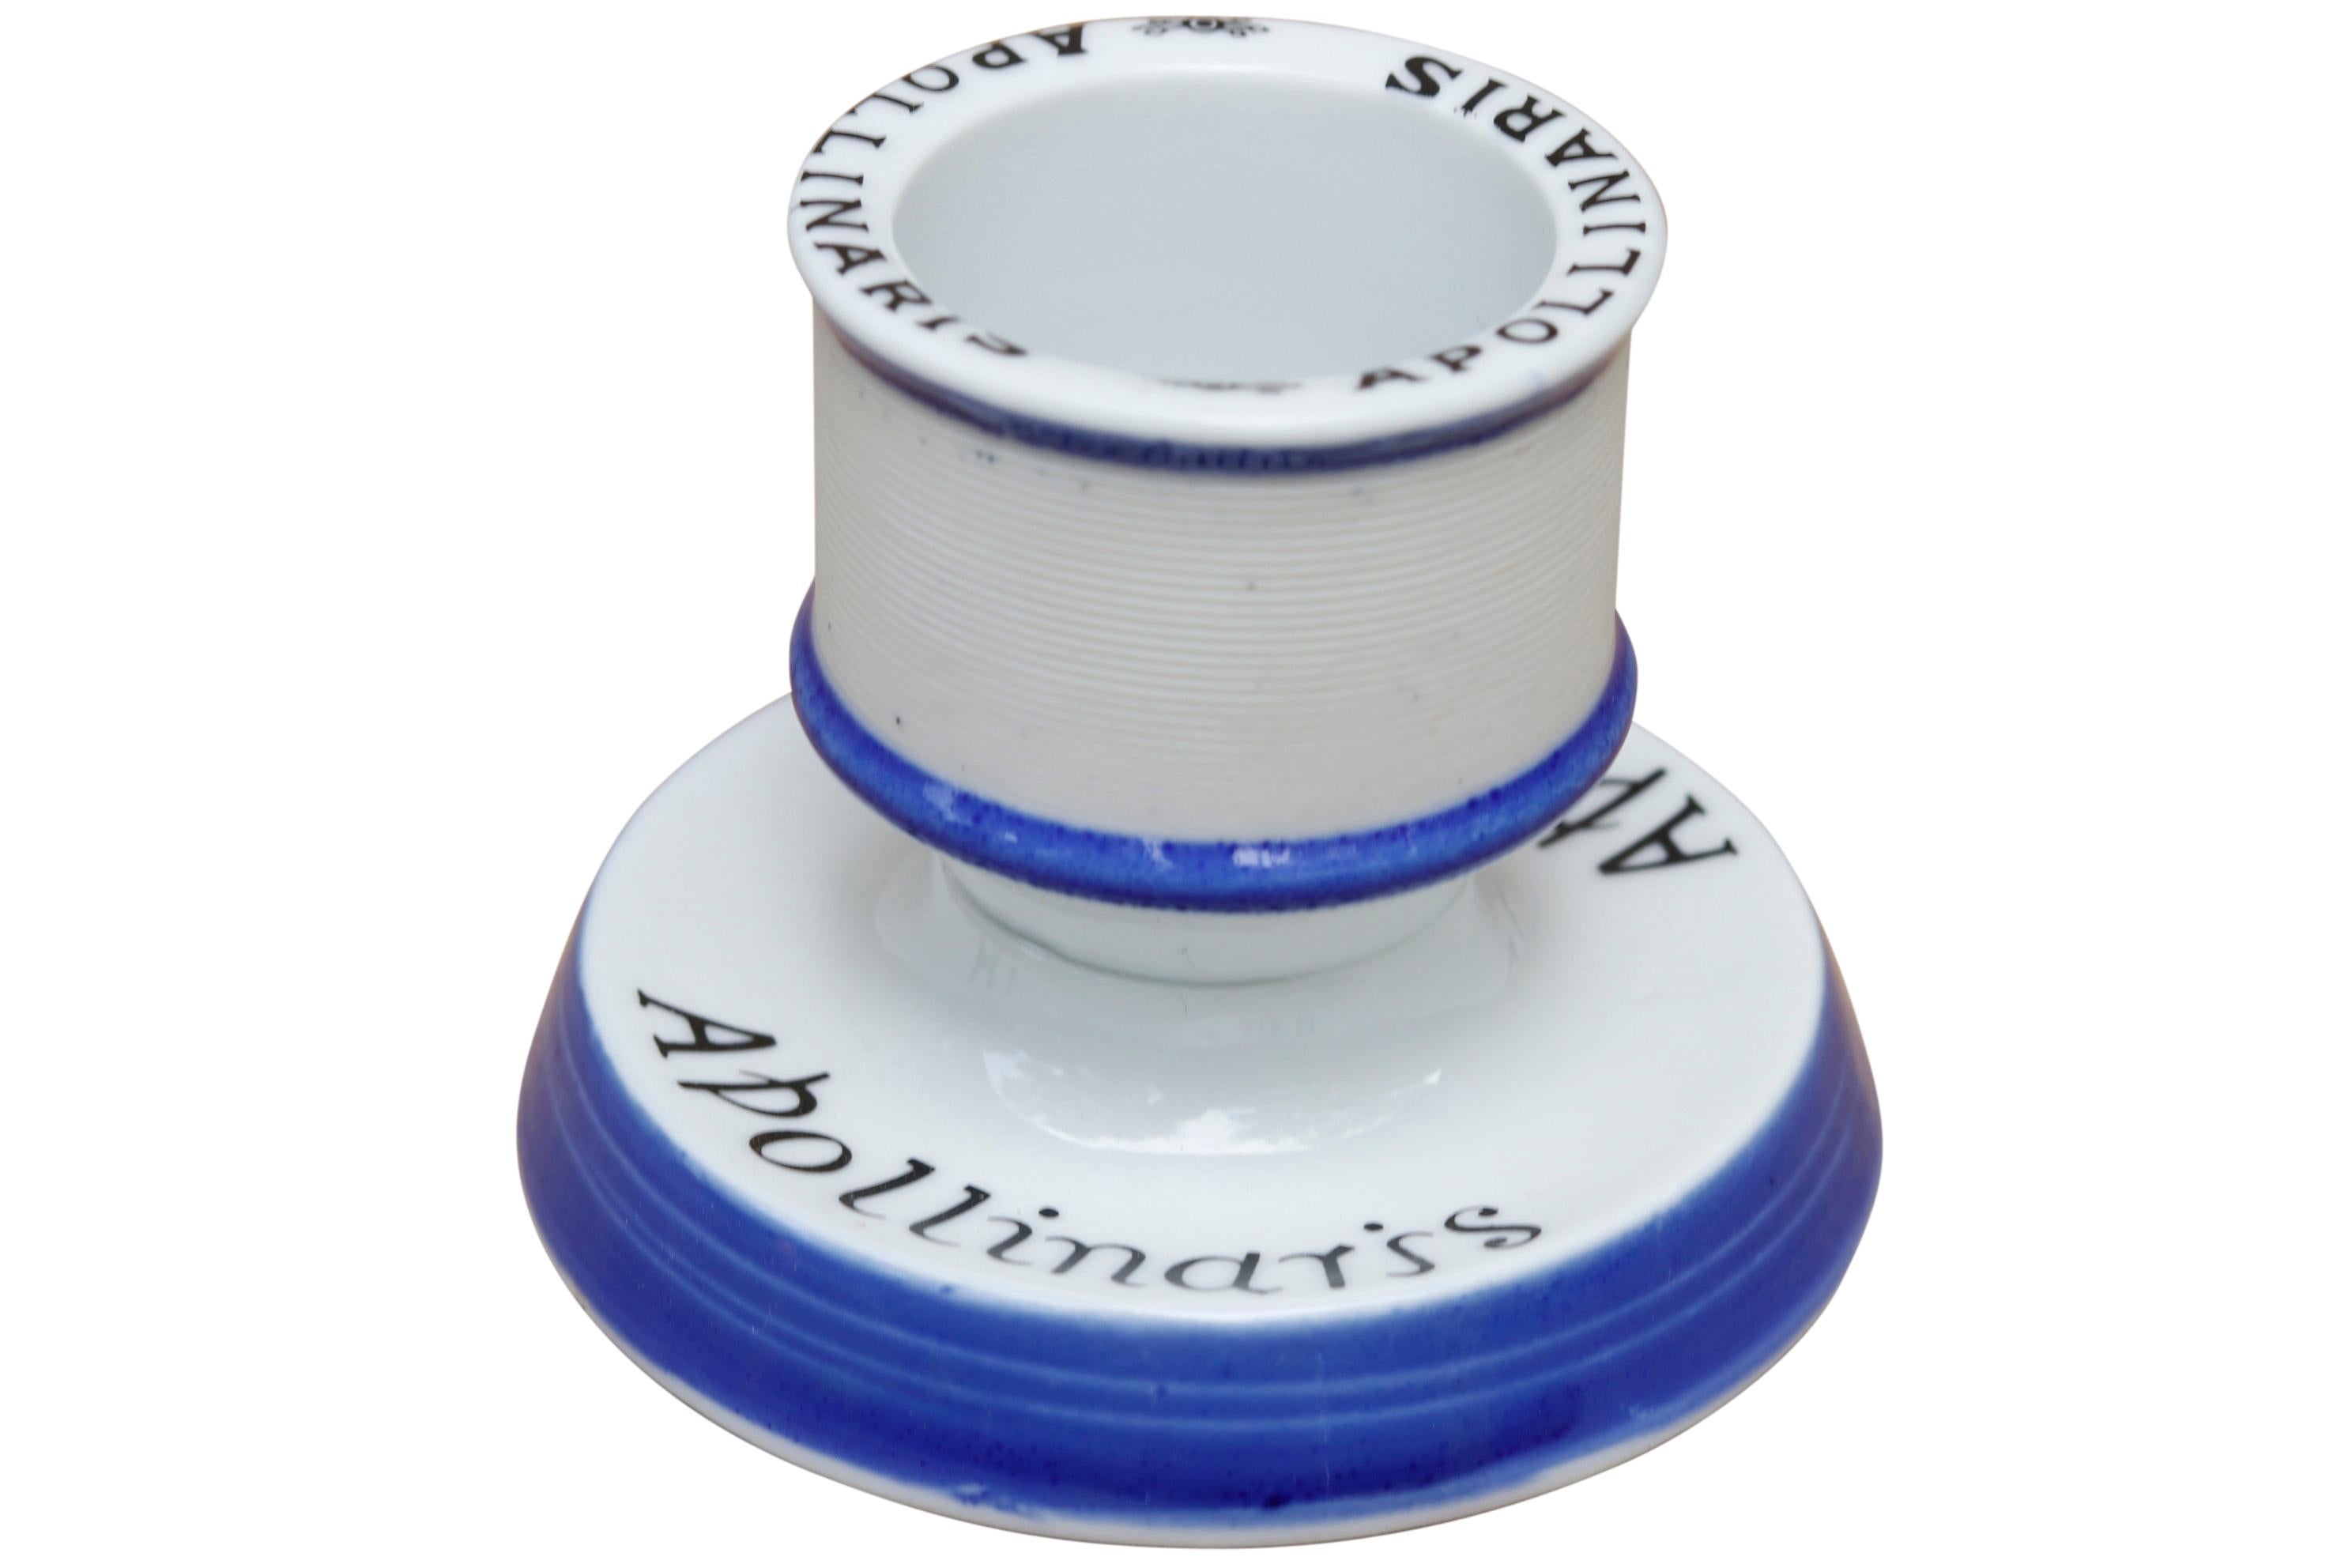 A vintage Apollinaris ceramic match striker and holder. Traditionally used in cafes, bars etc. In excellent condition.
 